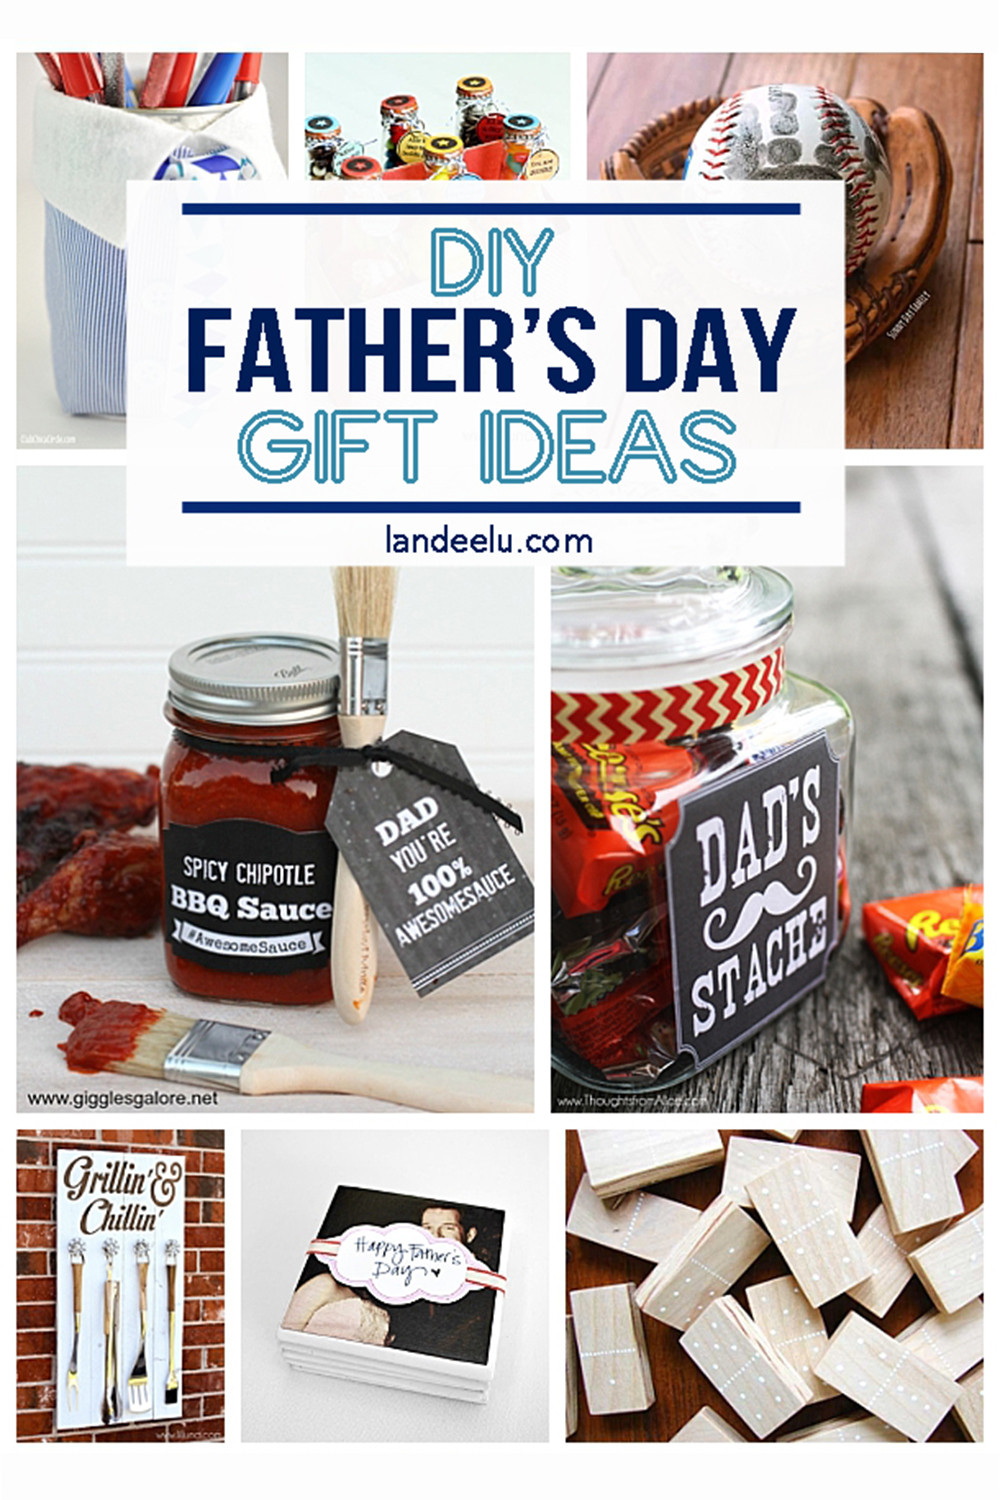 DIY Fathers Day Gift Ideas
 21 DIY Father s Day Gifts to Celebrate Dad landeelu